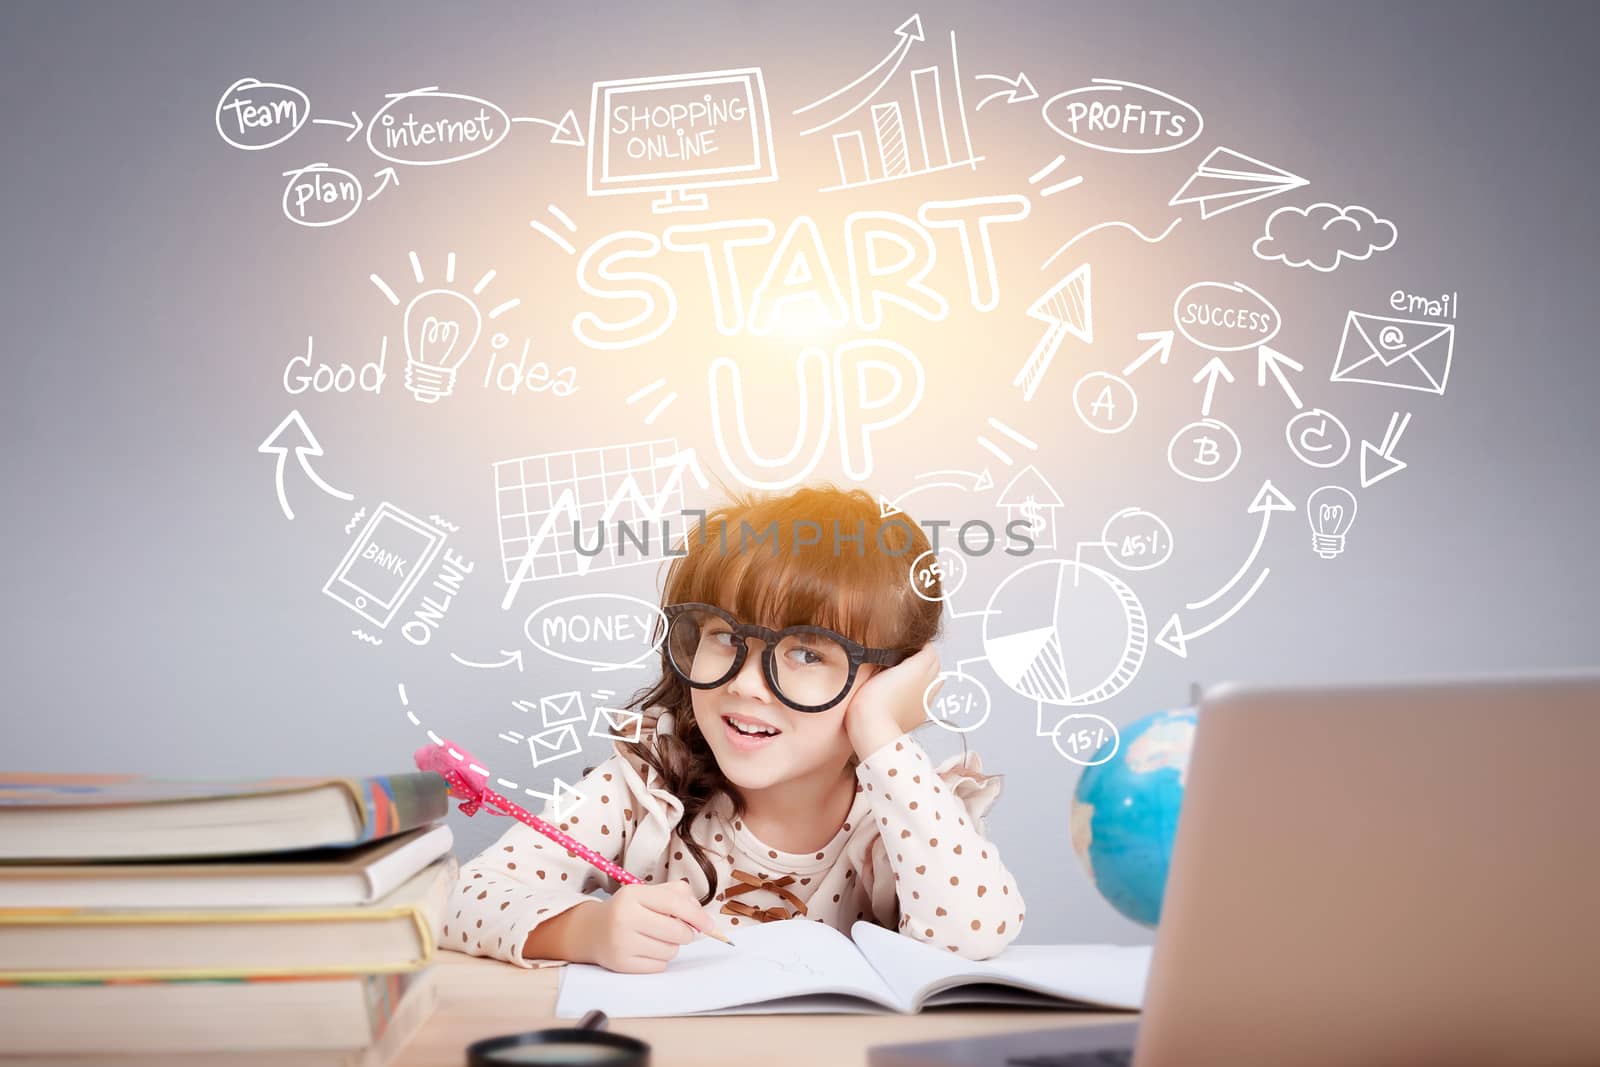 Easy start up business planner management concept : Portrait of a cute girl sitting on office desk with smiley face thinking with a business idea sketch depicted over head.